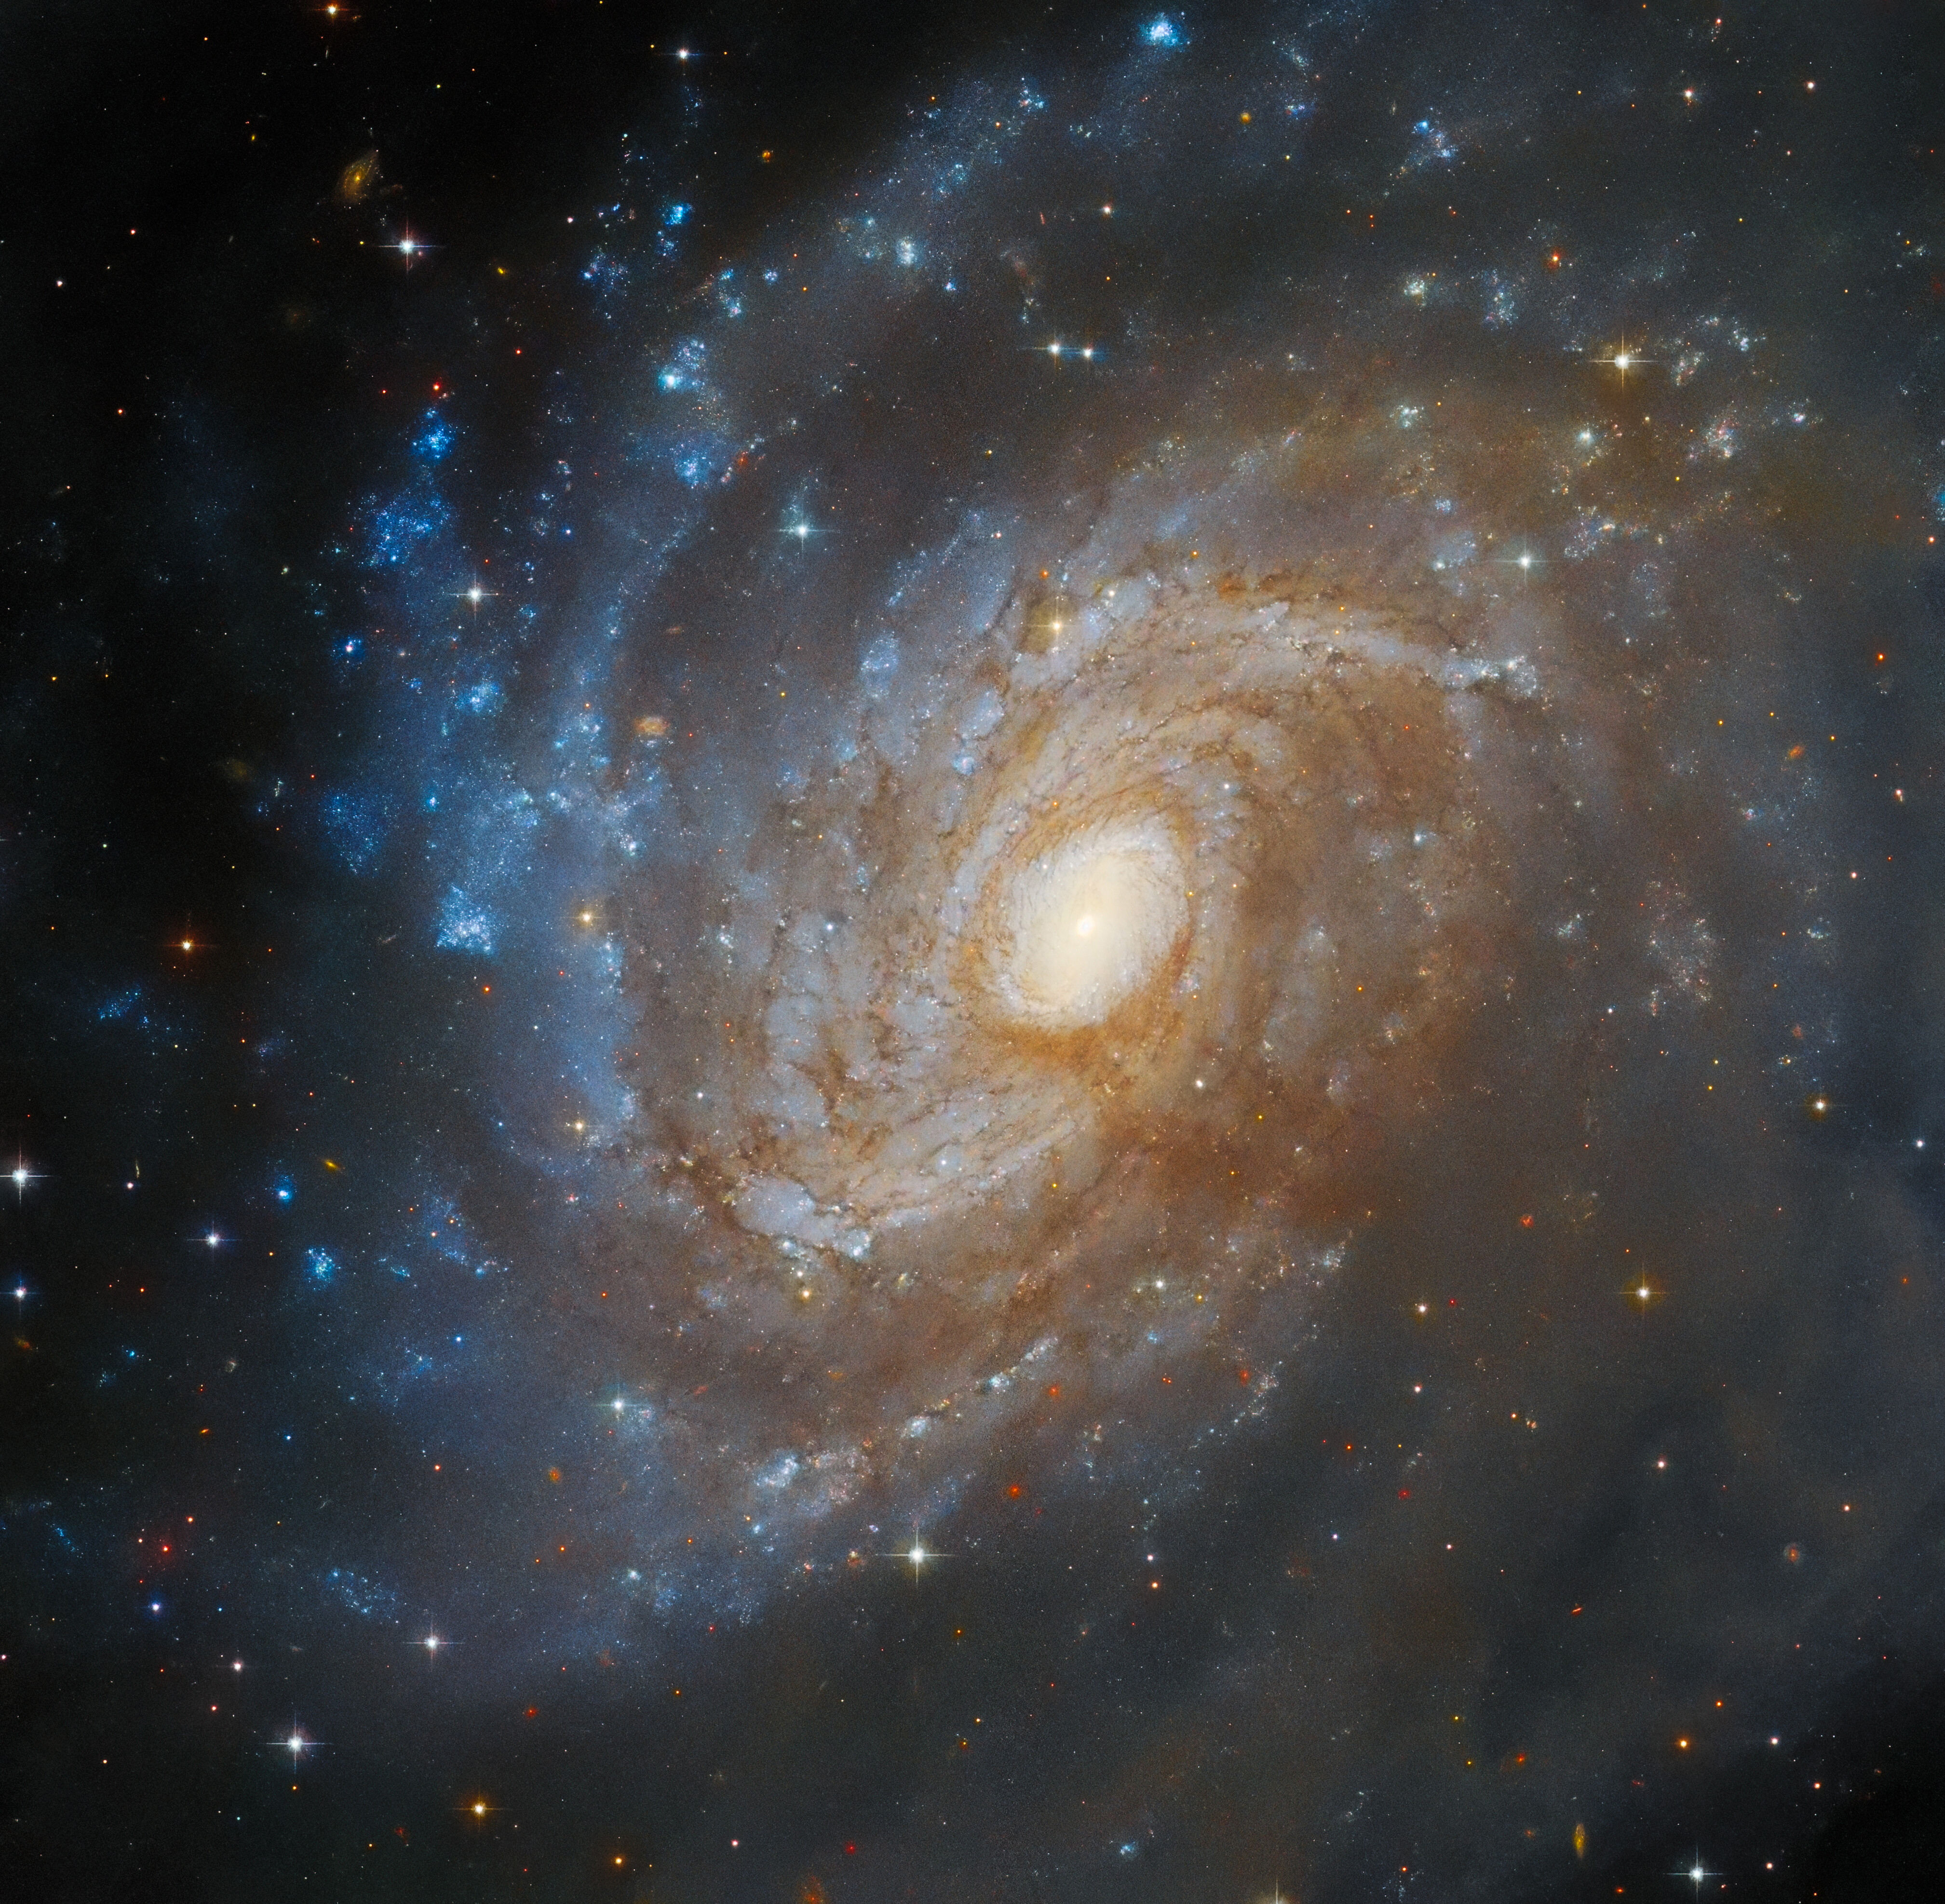 A spiral galaxy seen nearly face-on. The disk holds many tightly wound spiral arms. They contain small strands of reddish dust, near the center. On the left side, the disk features glowing patches of star formation. The whole right side, and part of the center, is obscured by a large cloud of dark grey gas which crosses the image.]